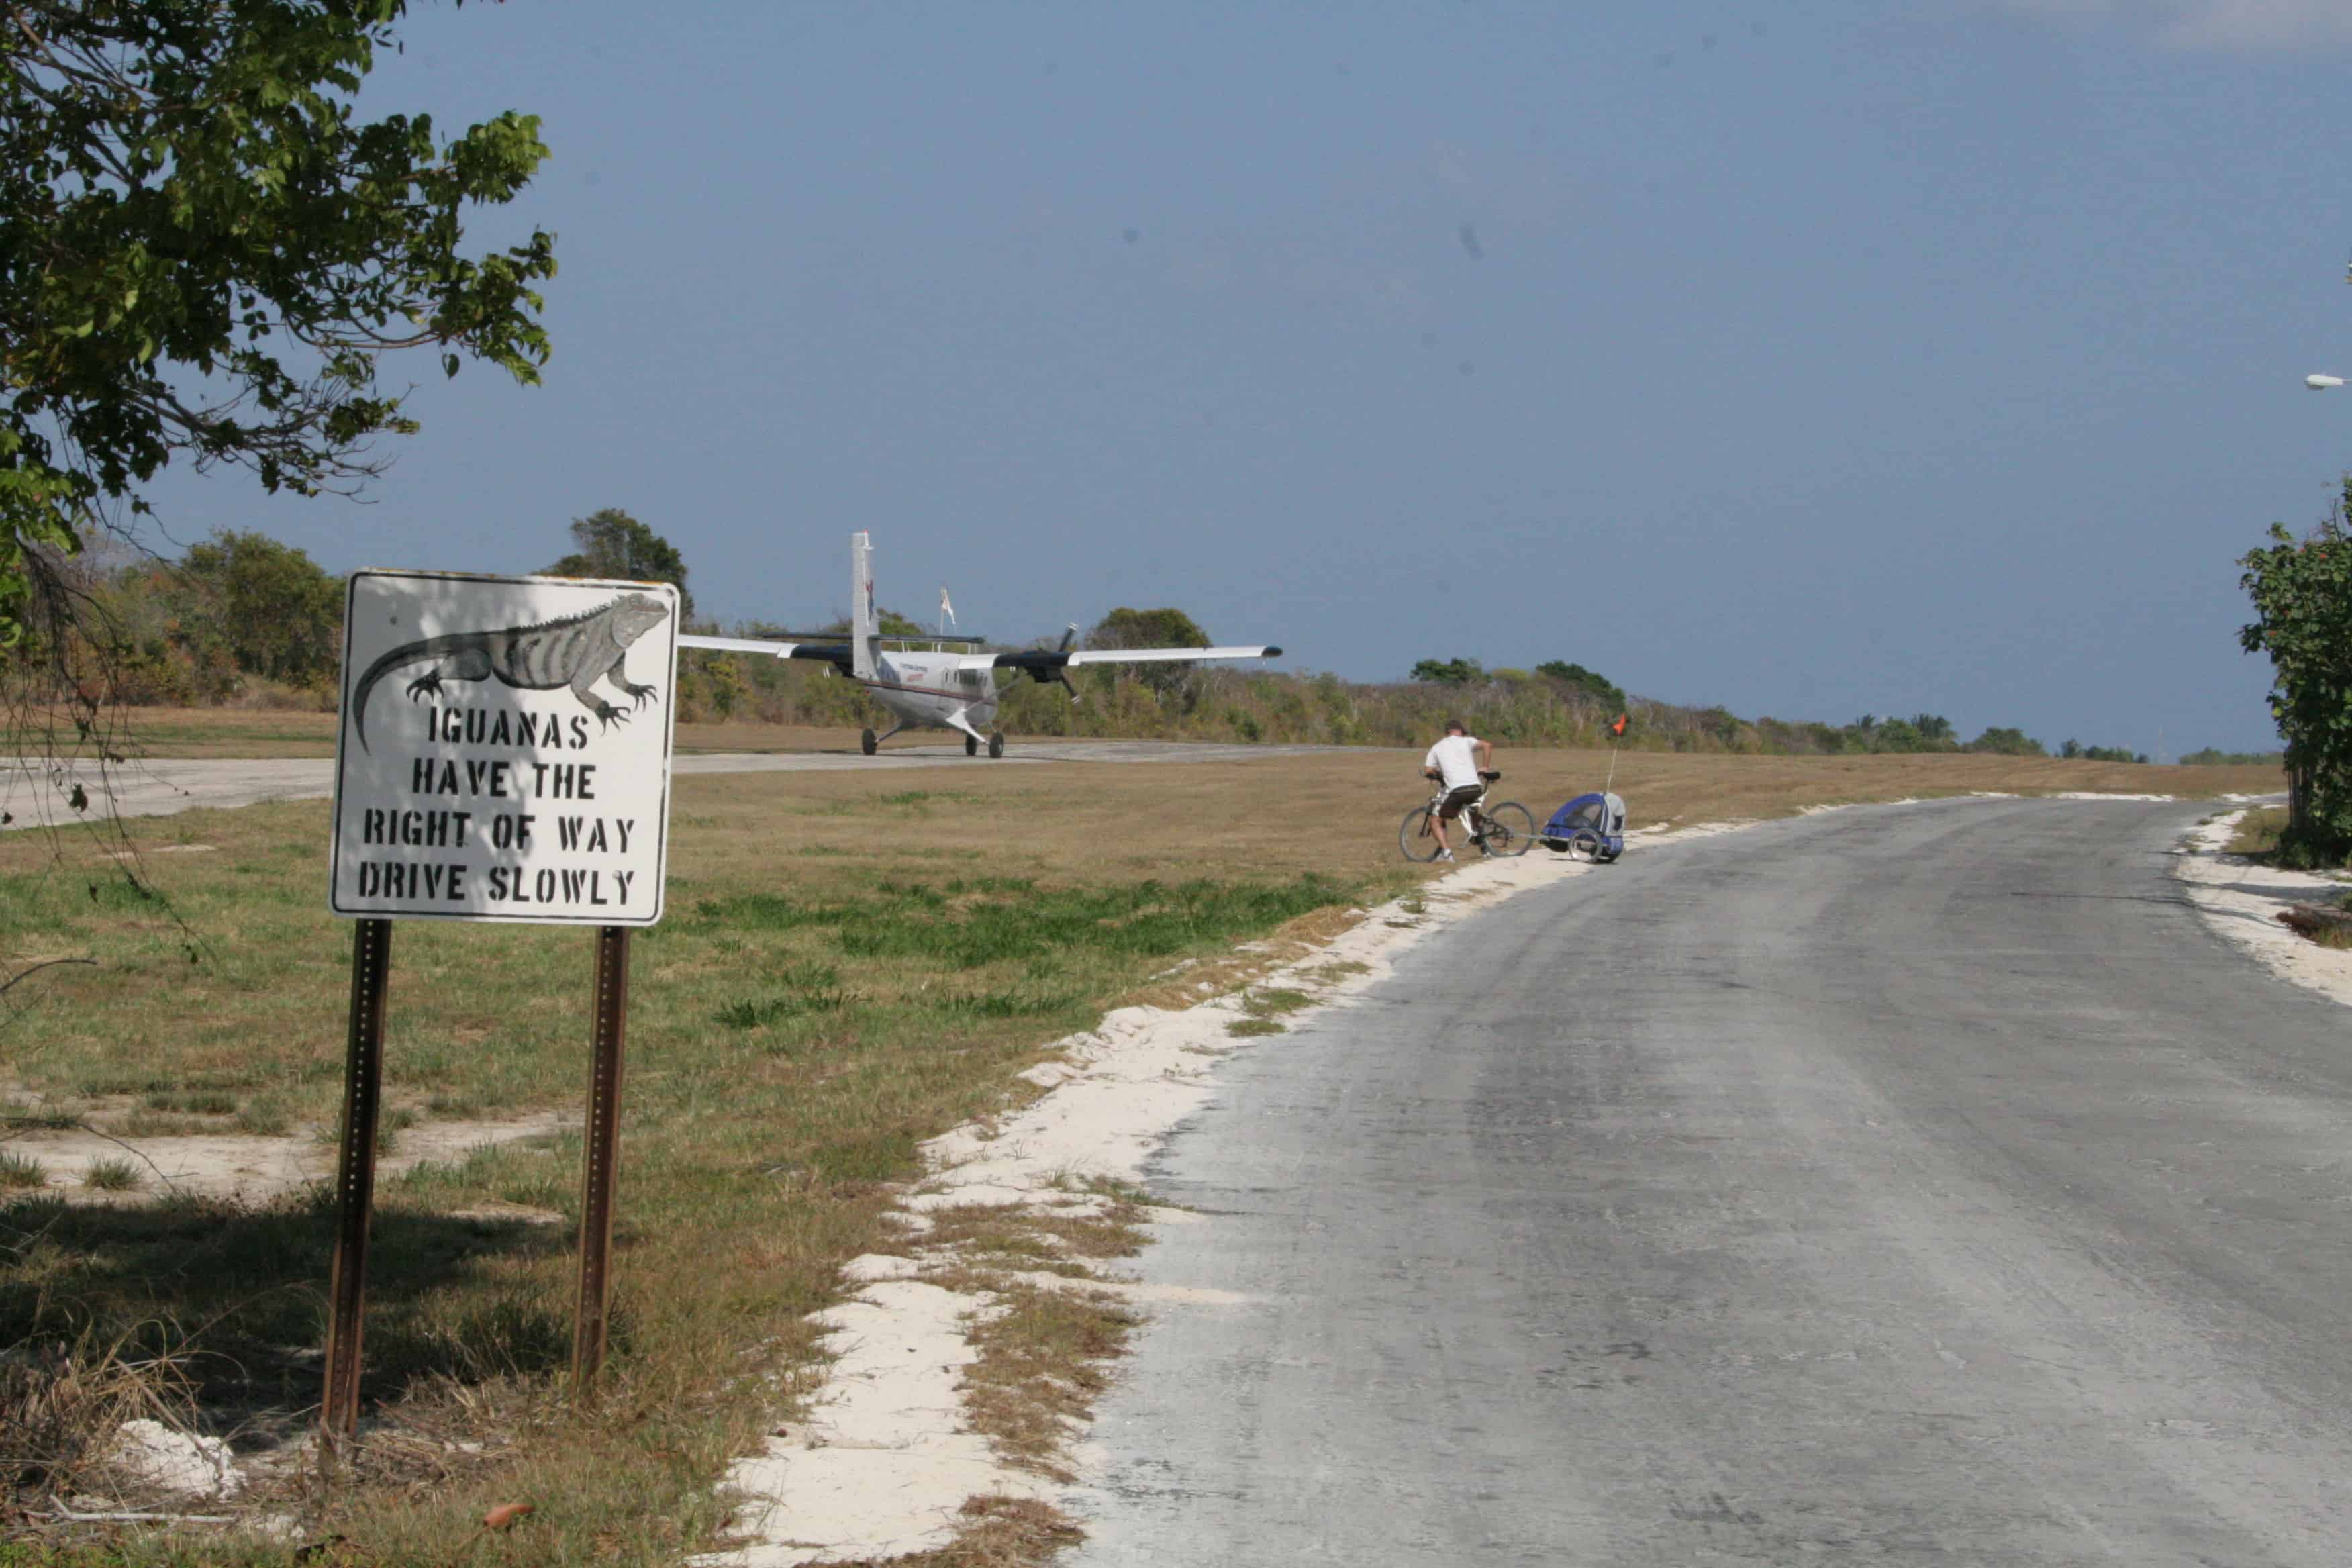 The islands are linked by aircraft. At Little Cayman airport, car drivers (and perhaps pilots) are asked to give way to the native iguanas. Copyright: Dr Mike Pienkowski